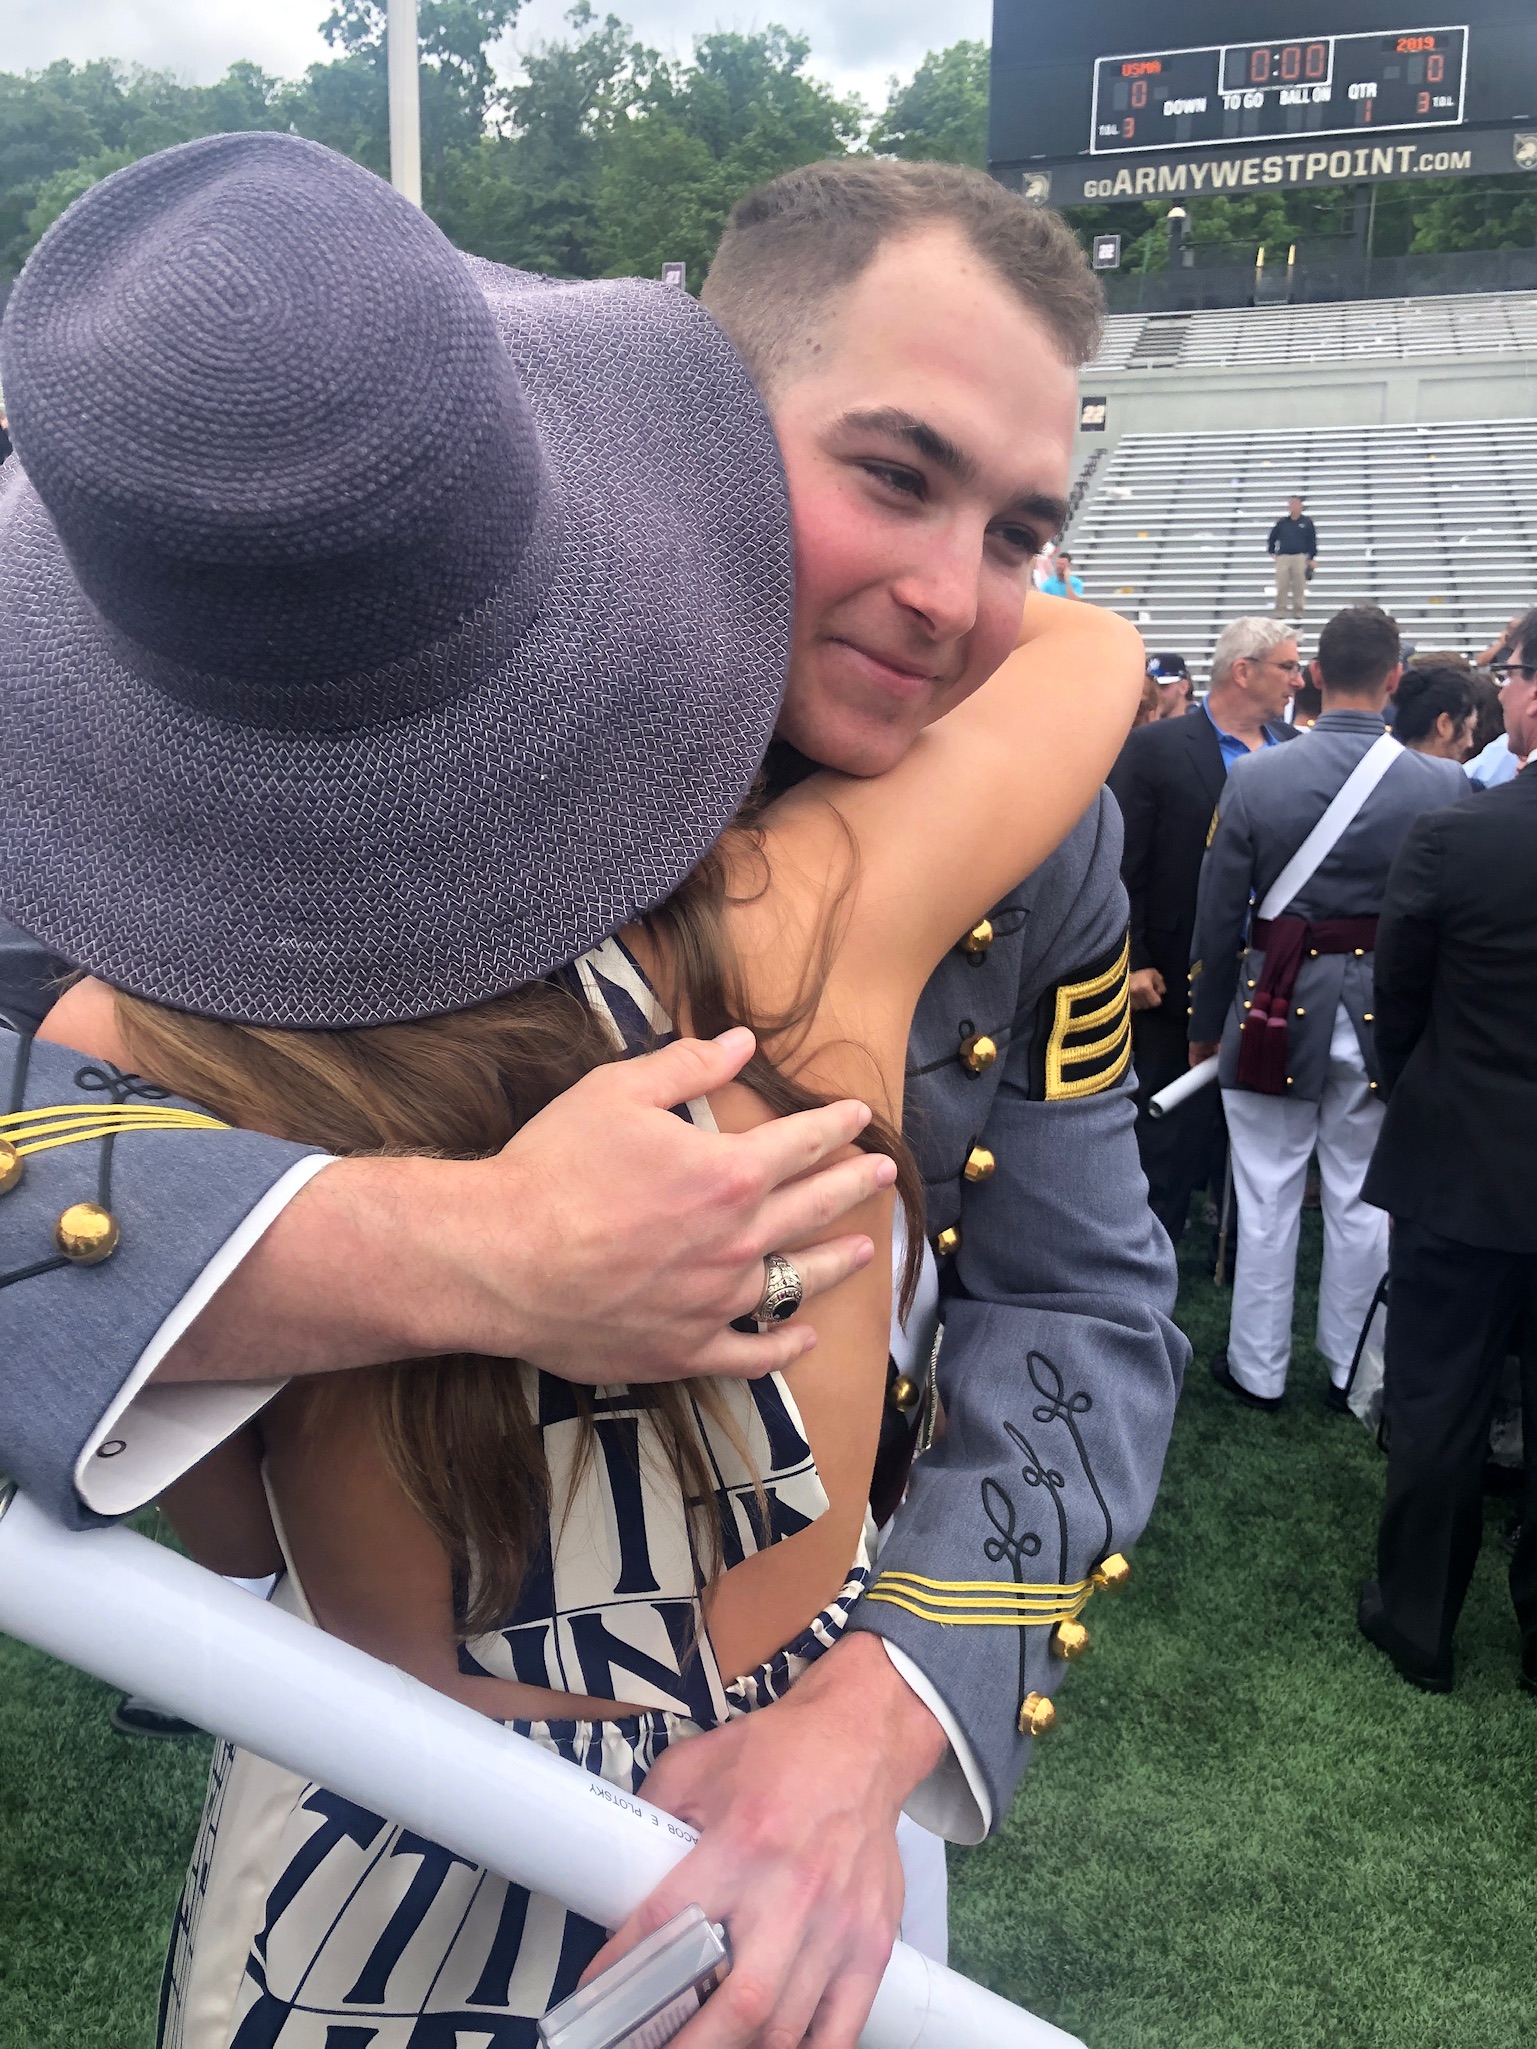 Kennedy and Jake at the 2019 West Point Graduation Ceremony.